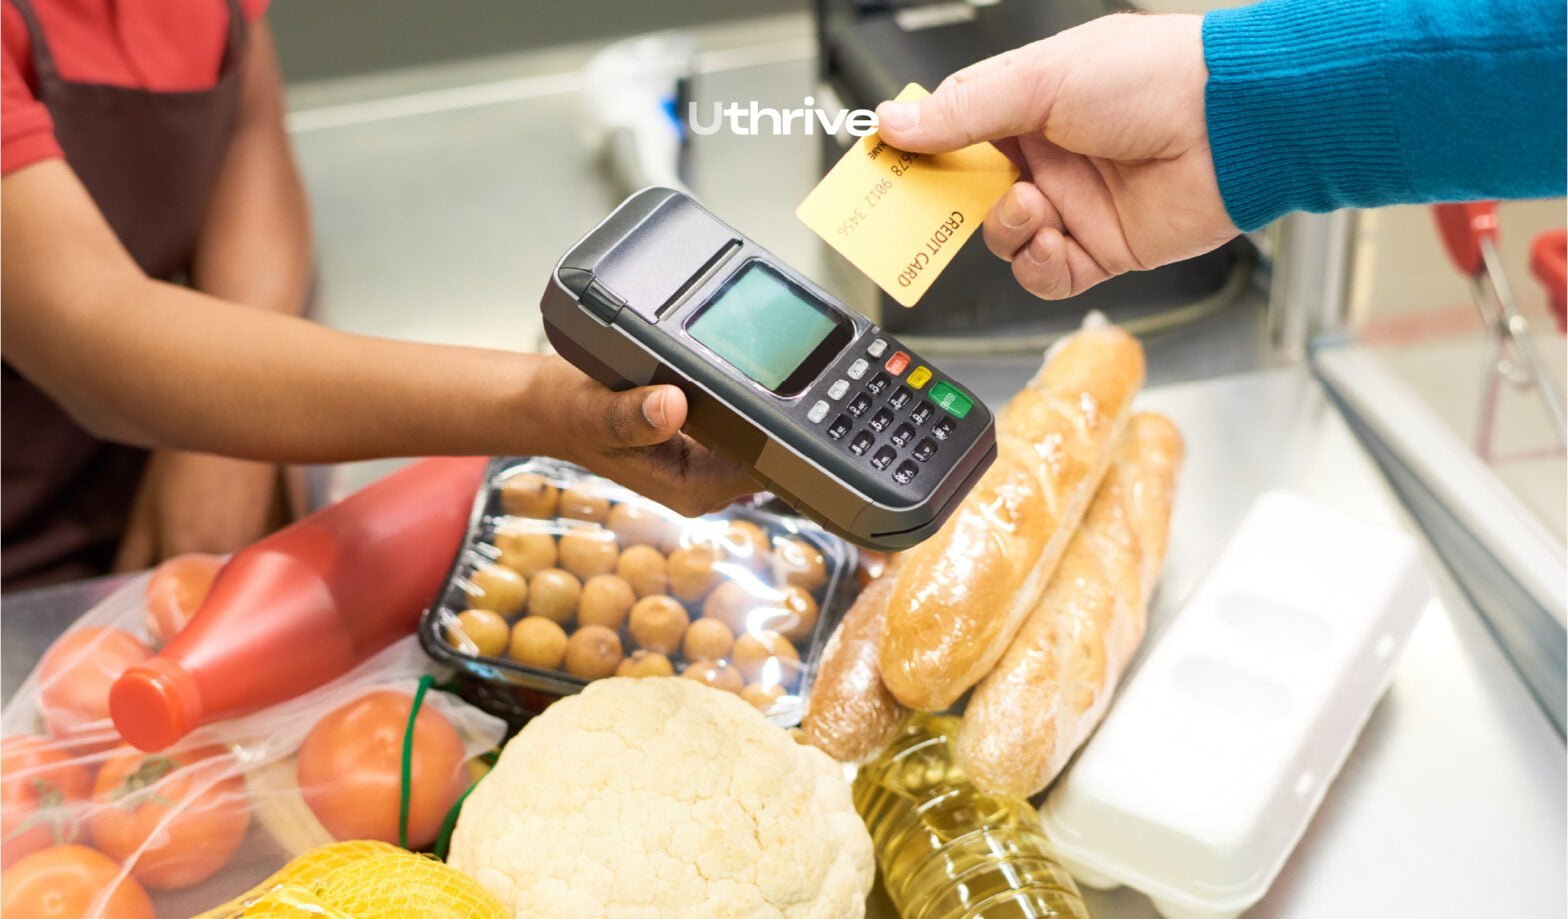 Best Credit Cards for Groceries